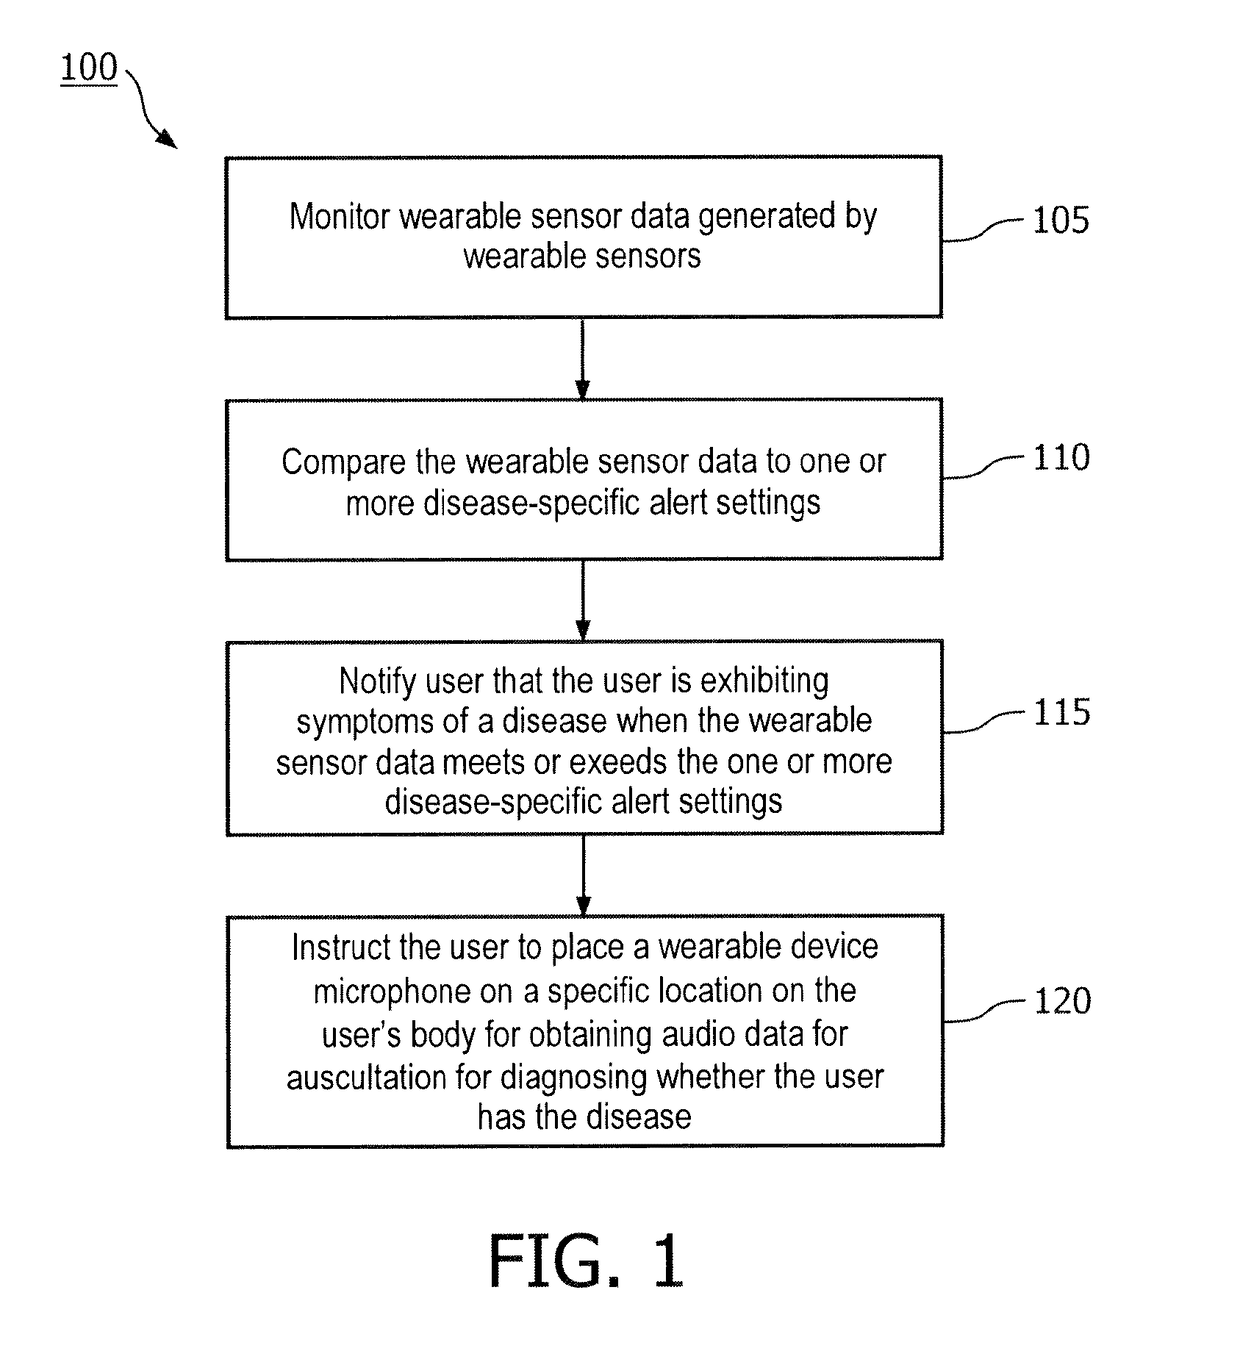 Wearable device obtaining audio data for diagnosis